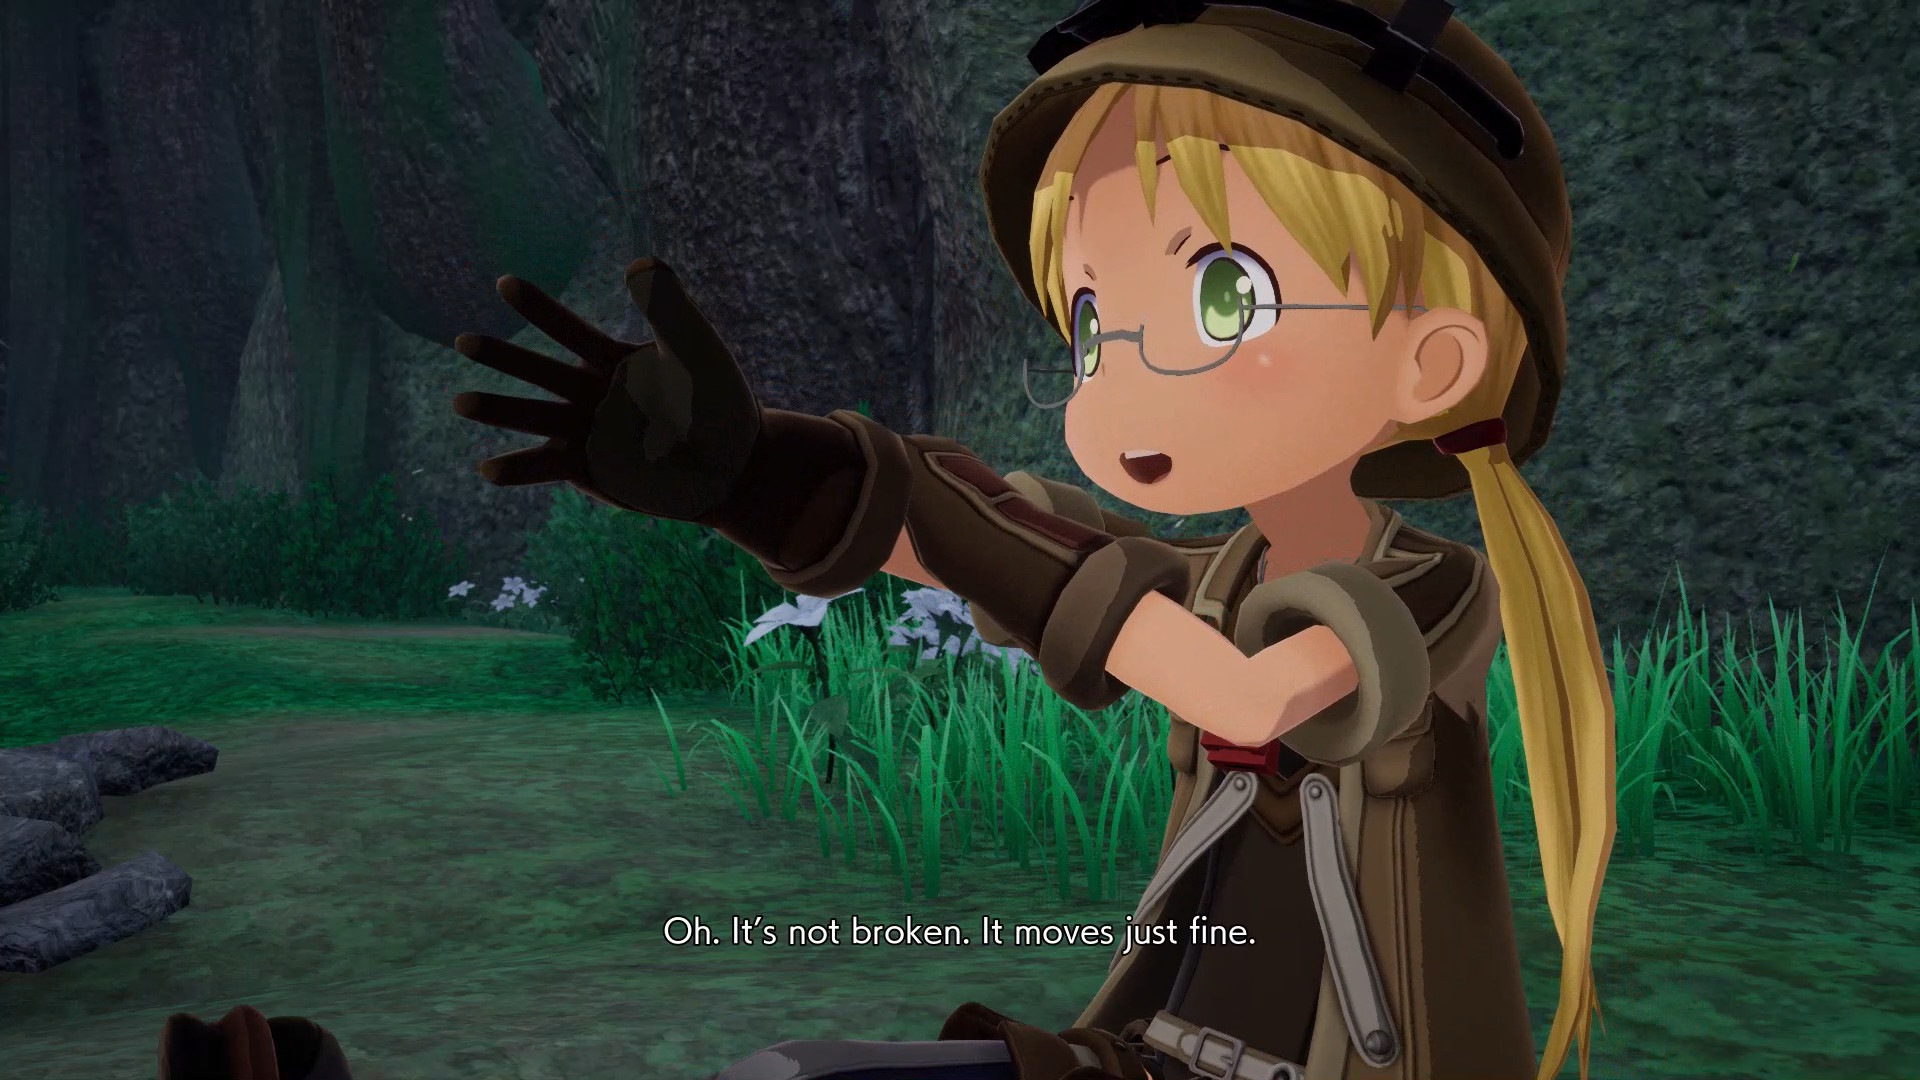 Made in Abyss Season 2 Episode 3 Release Date & Time